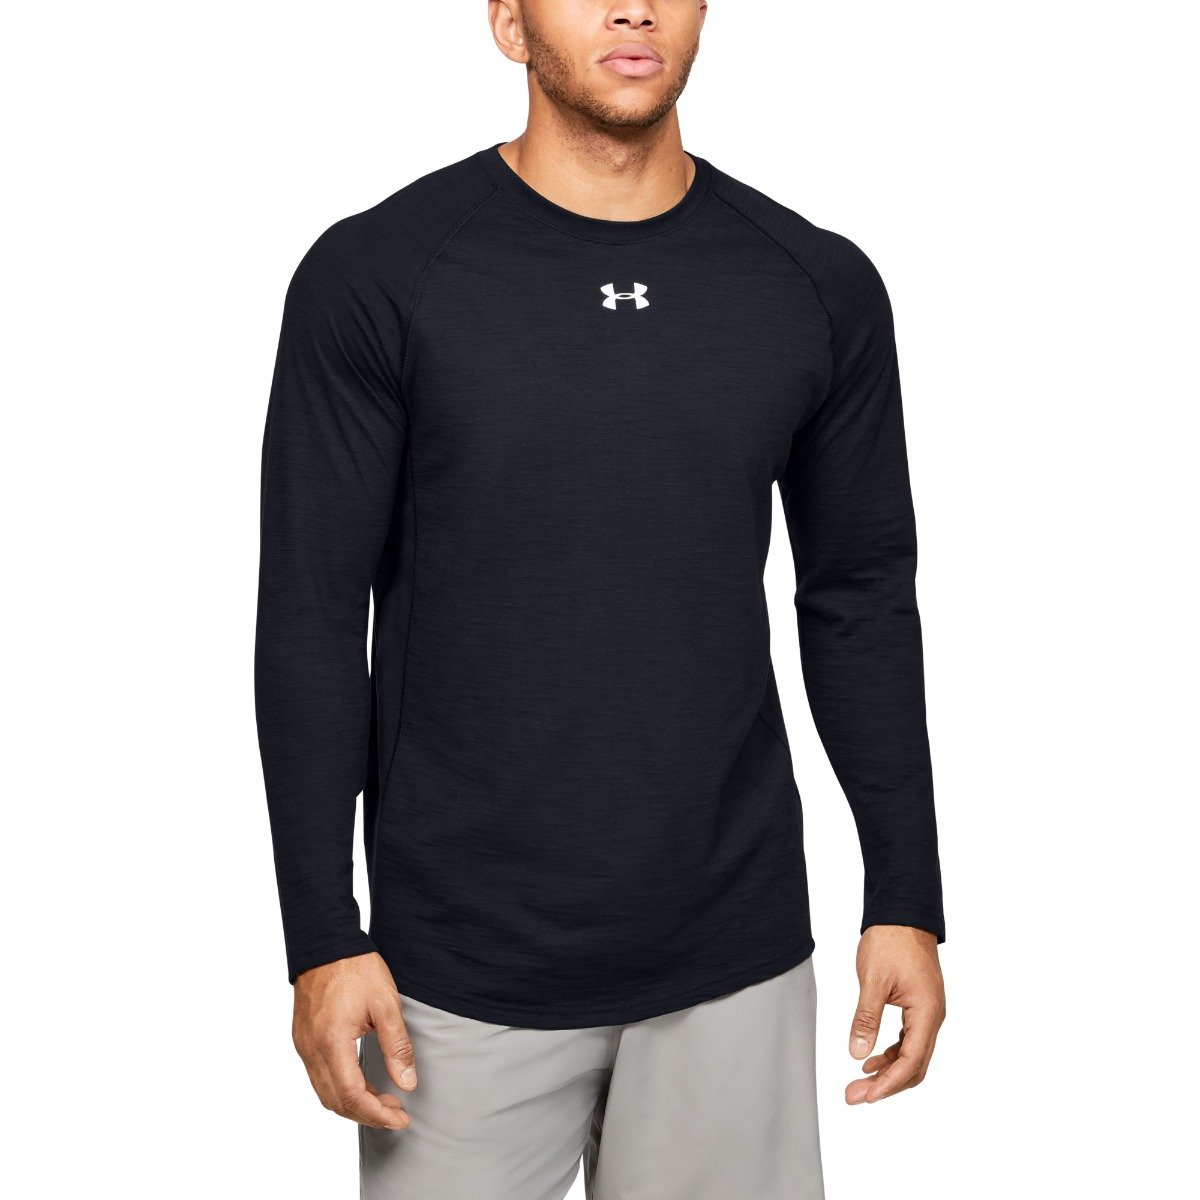 FITNESS TRAINING Under Armour CHARGED COTTON - Camiseta de